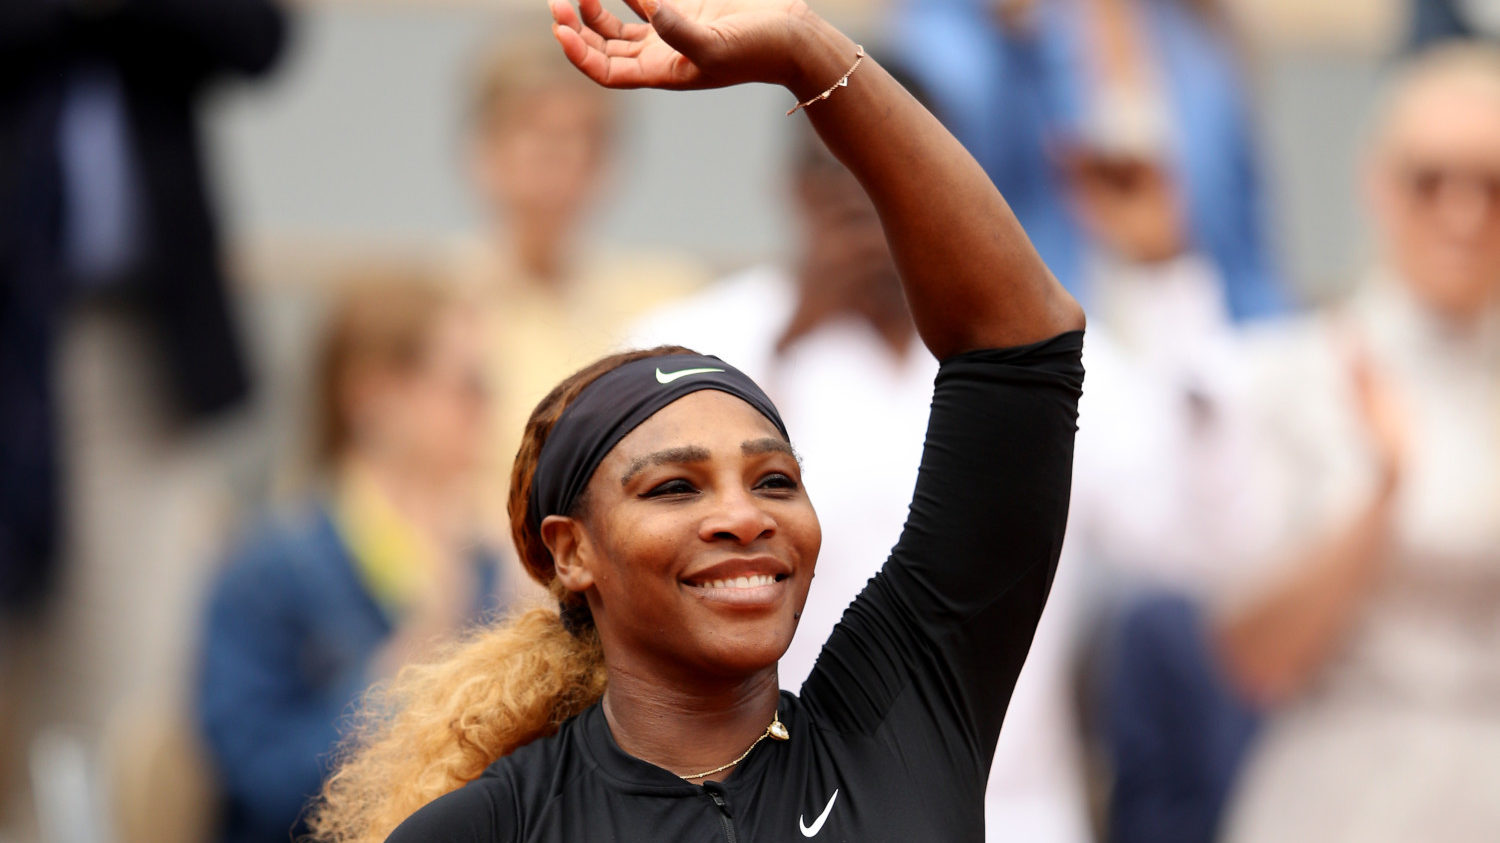 2019 French Open - Day Five